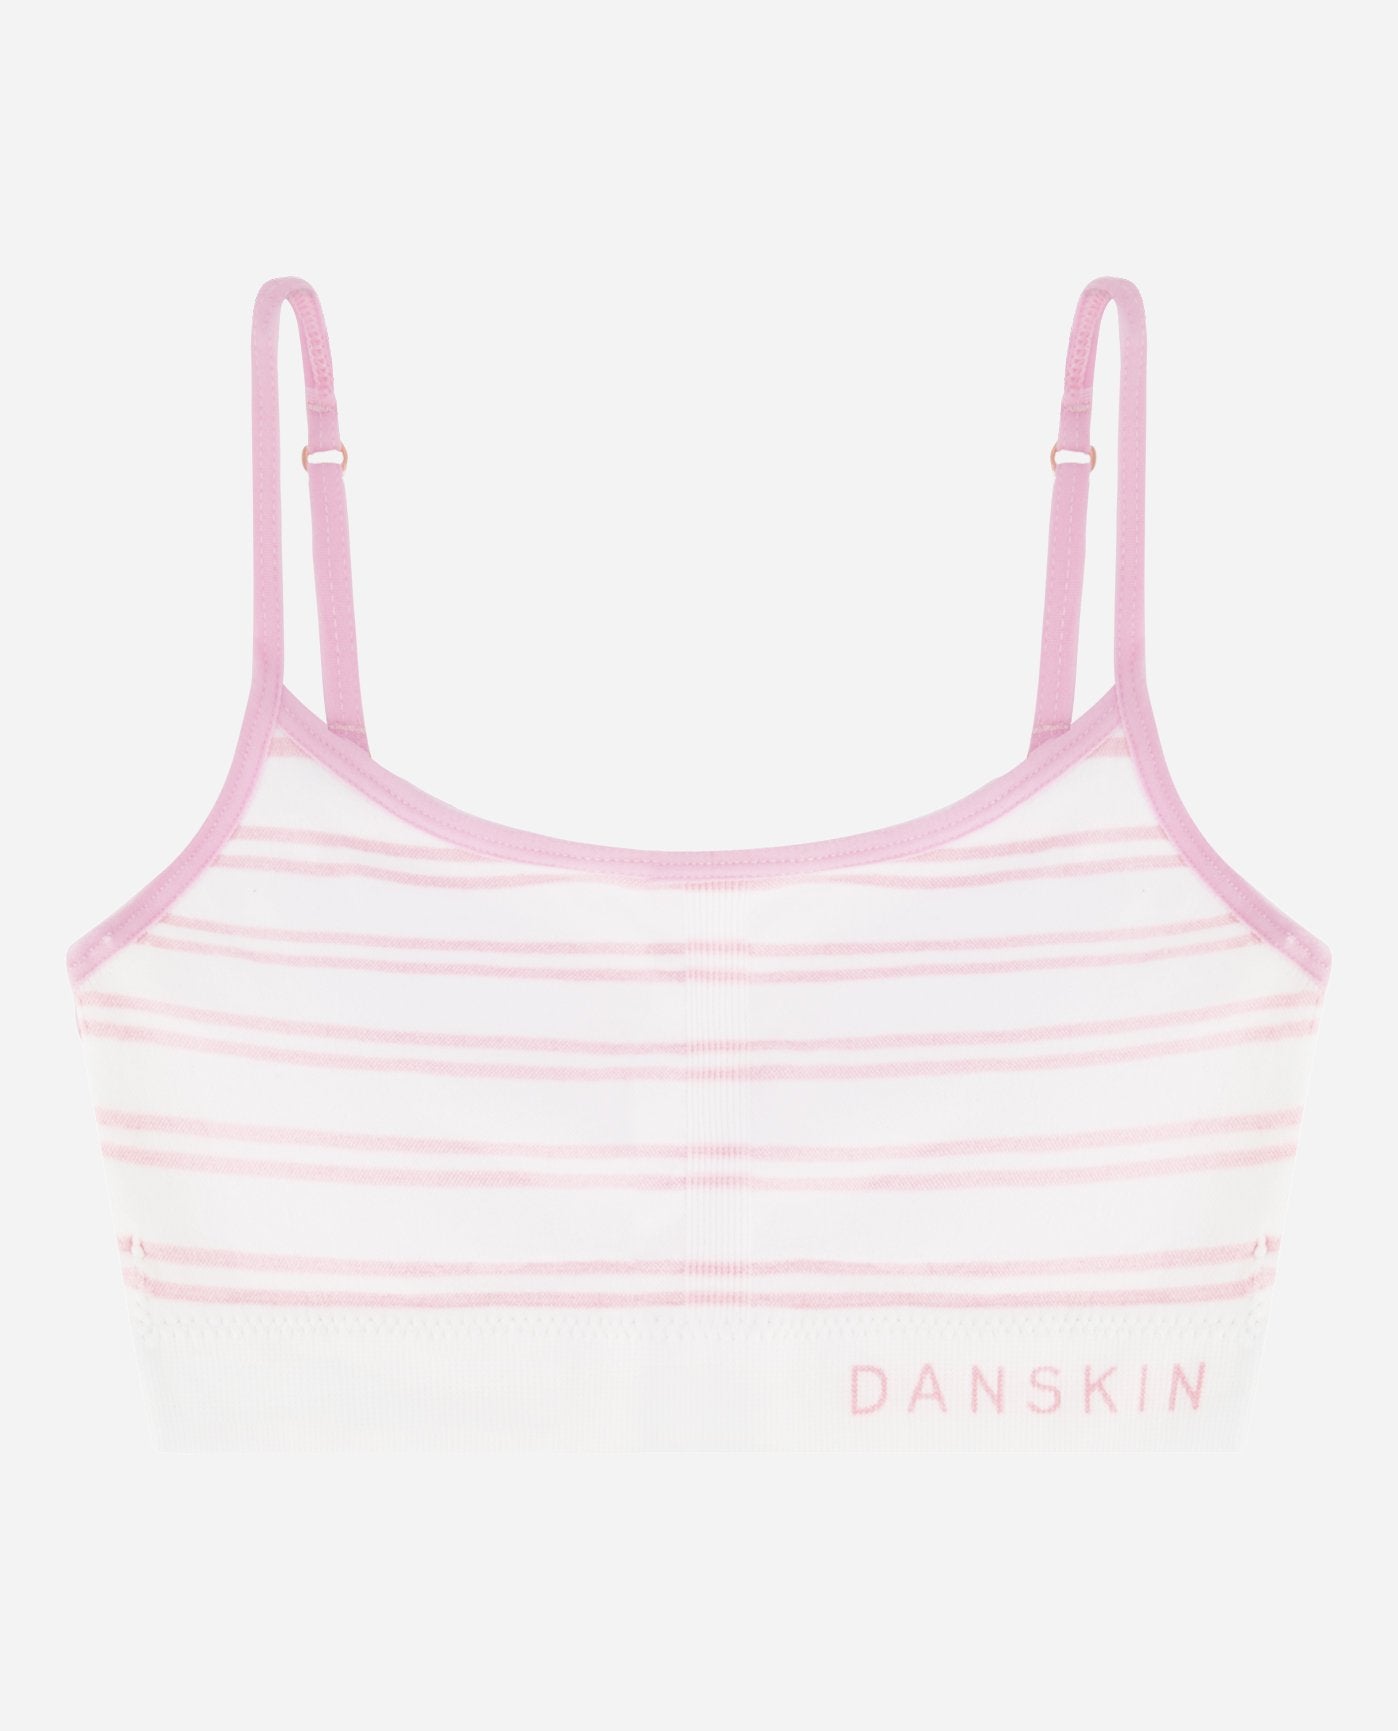 Danskin Gray Double Strap Ribbed Bralette Size Small - $7 - From